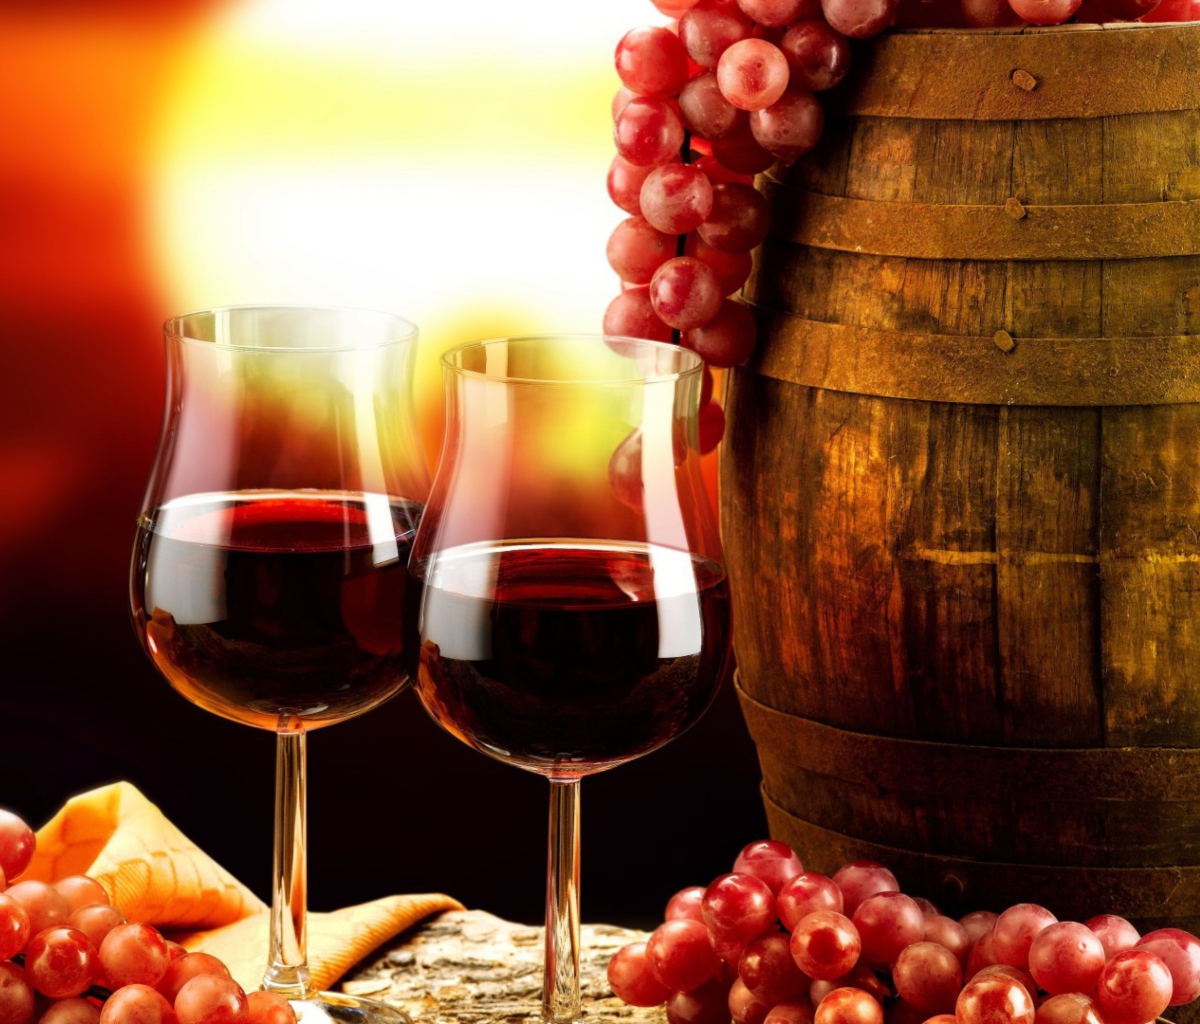 Das Red Wine And Grapes Wallpaper 1200x1024